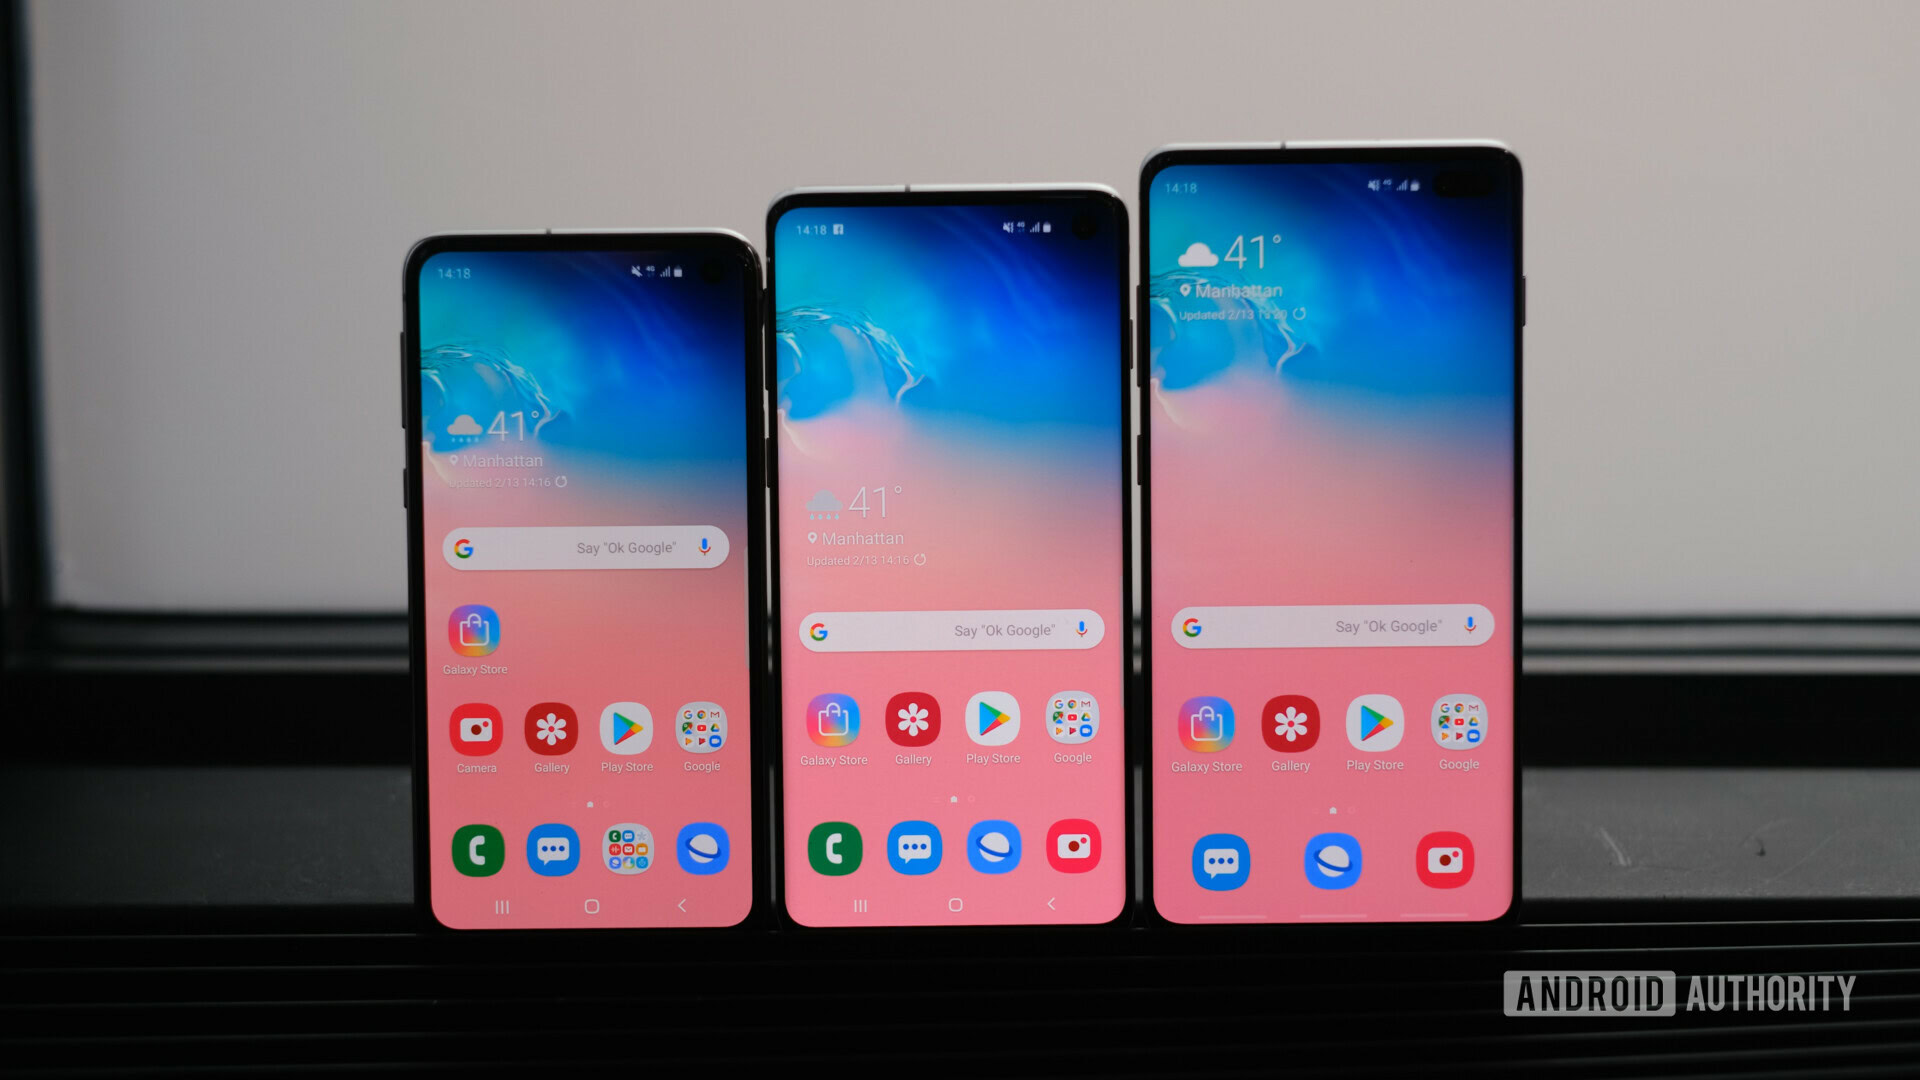 Samsung Galaxy S10 review: Finding the middle ground is hard